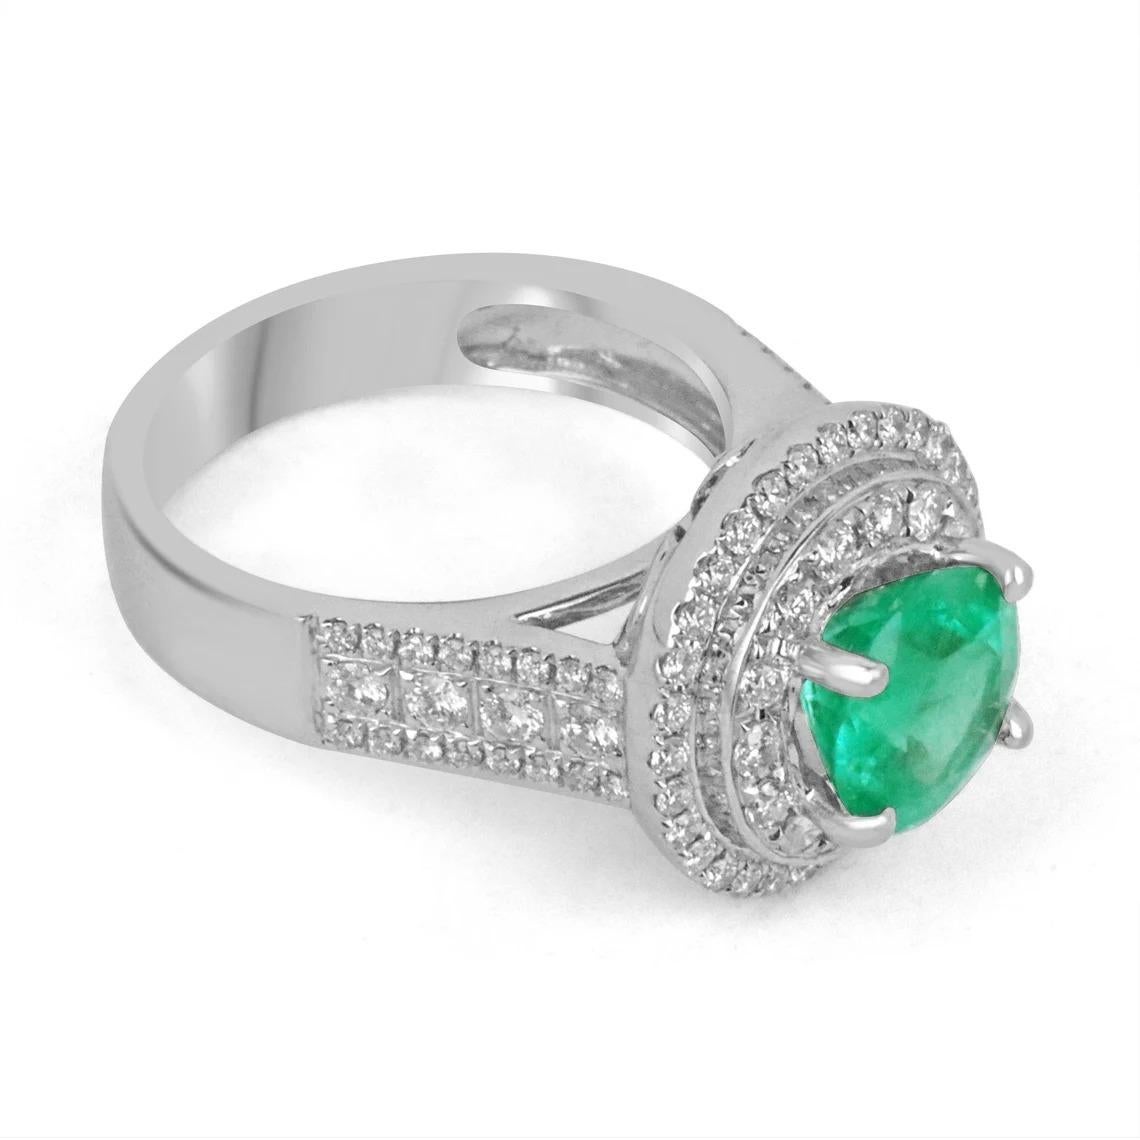 This is a very rare, round Colombian emerald and diamond engagement/right-hand ring. Color and brilliance can best describe this rare Colombian emerald ring. The luminous, bluish-green, round emerald has amazing qualities that make it exclusive. The